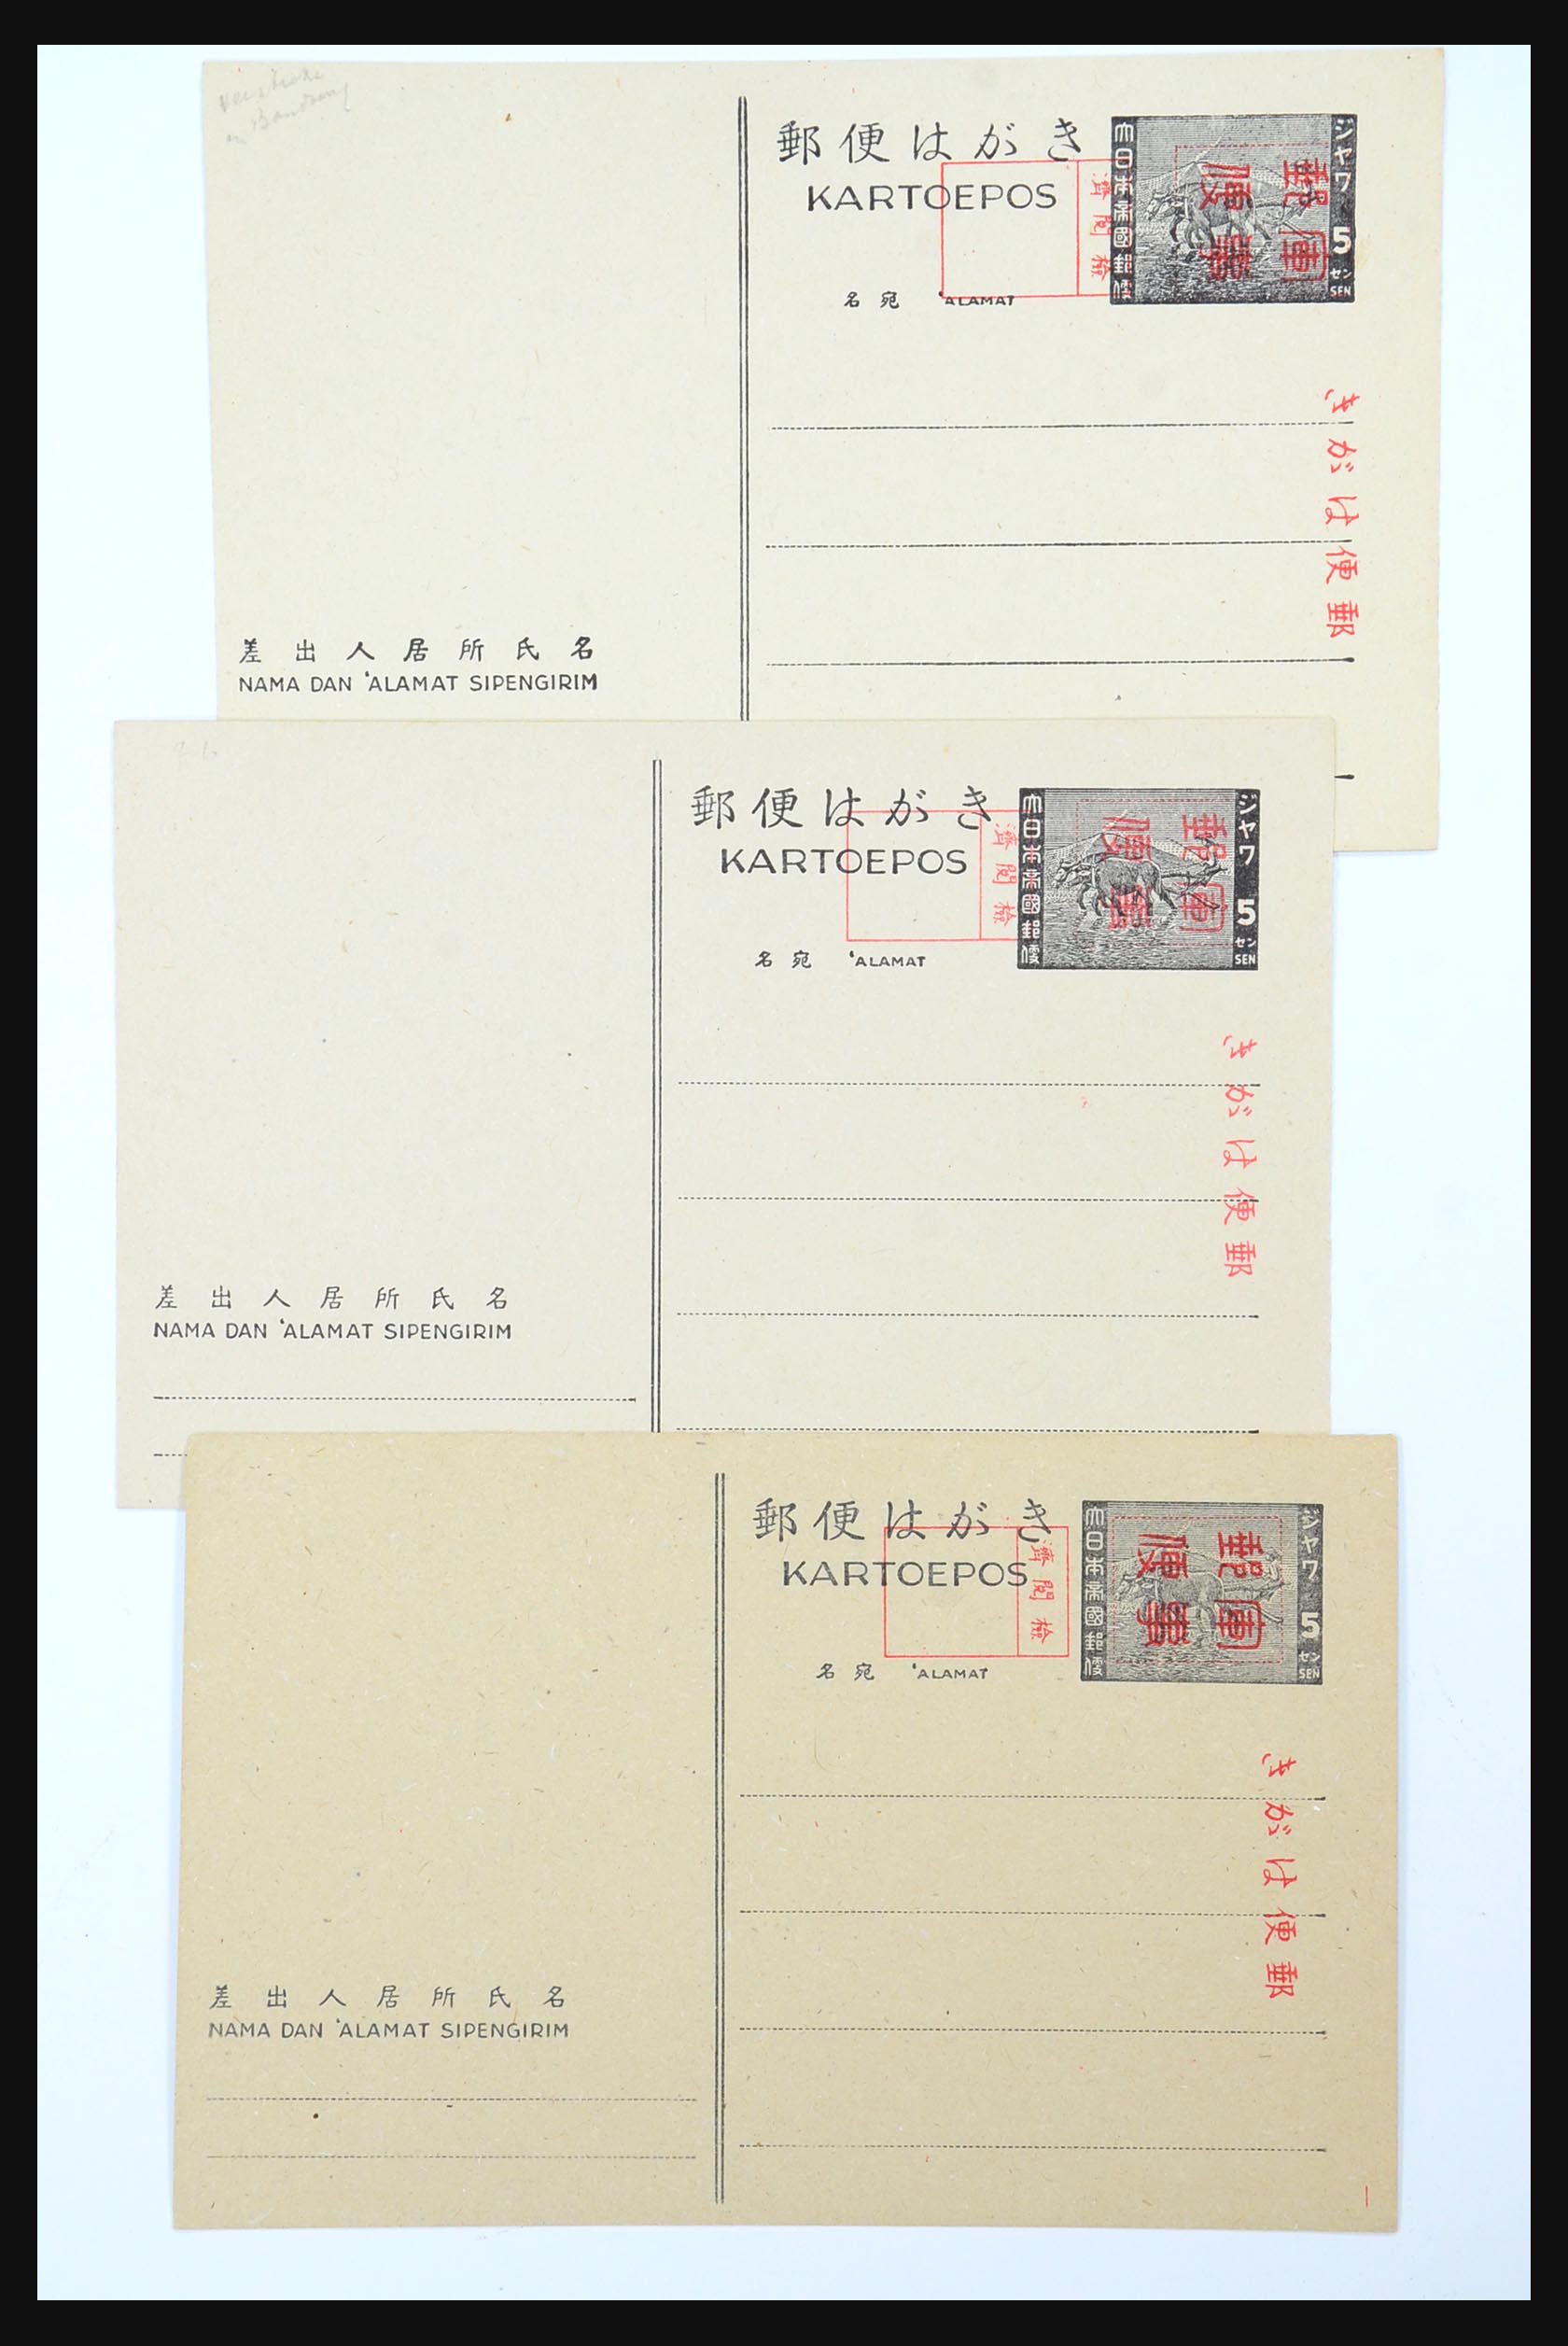 31362 073 - 31362 Netherlands Indies Japanese occupation covers 1942-1945.